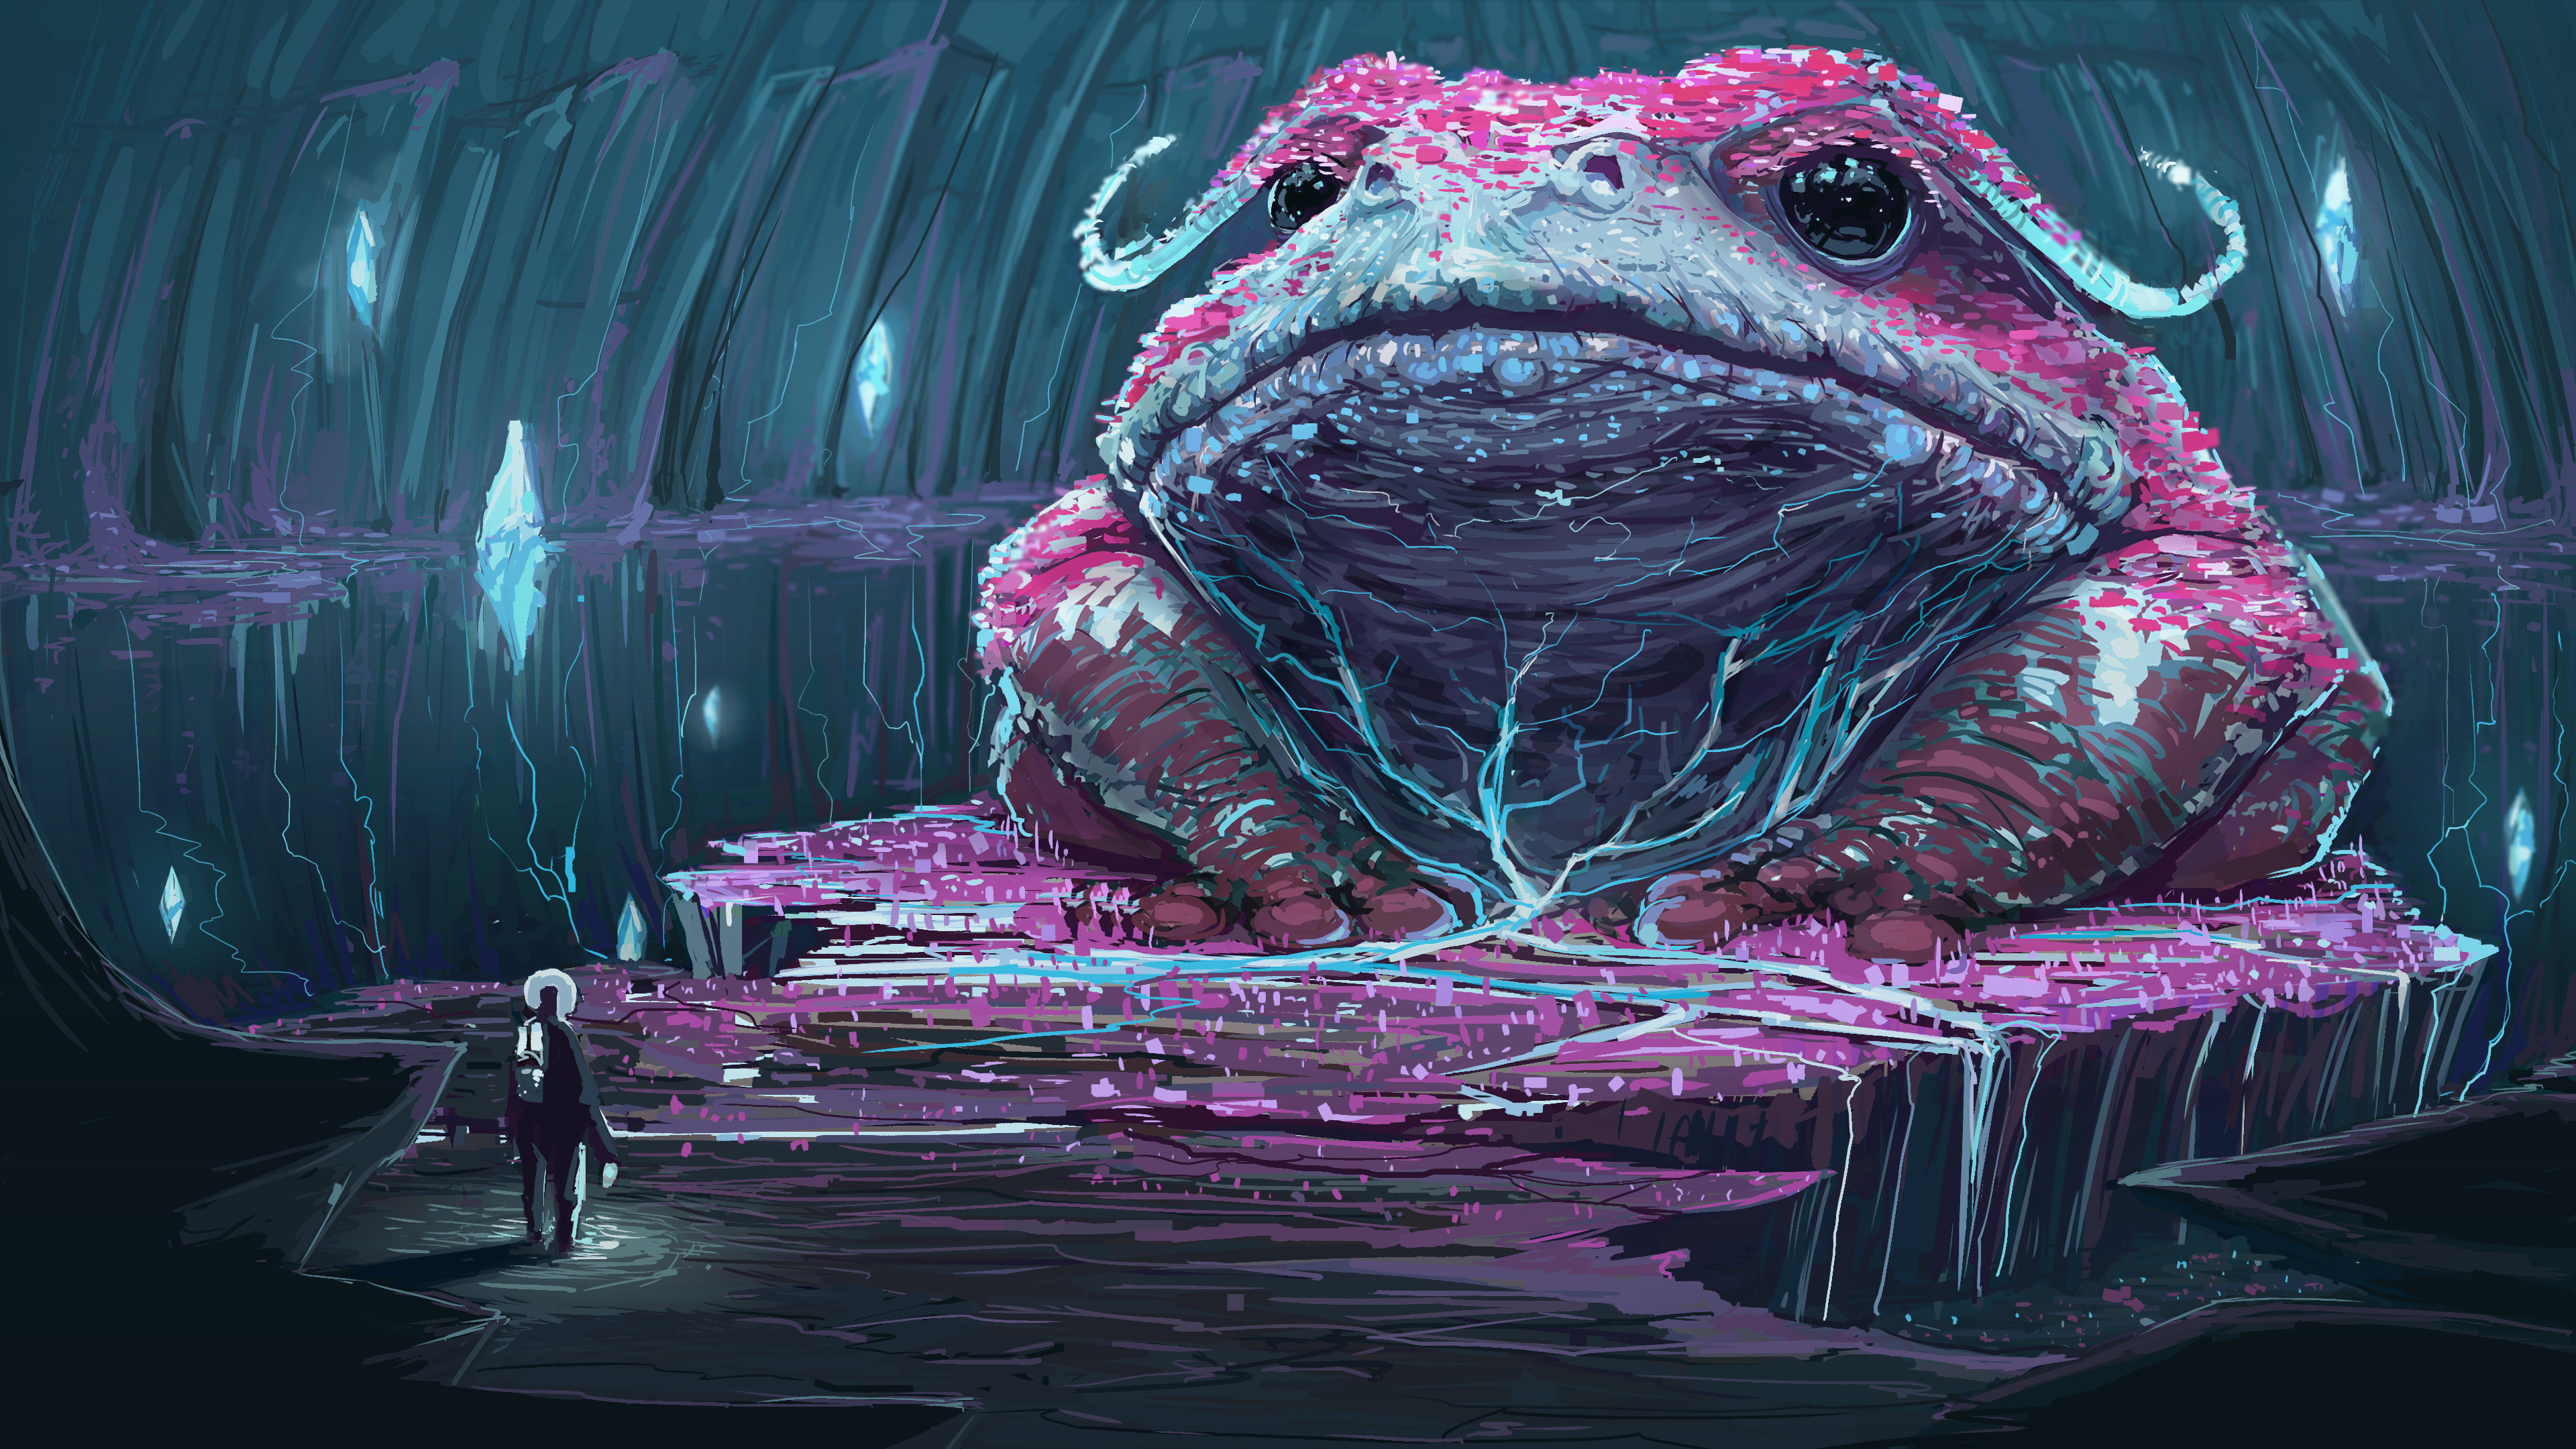 The Neon Toad.